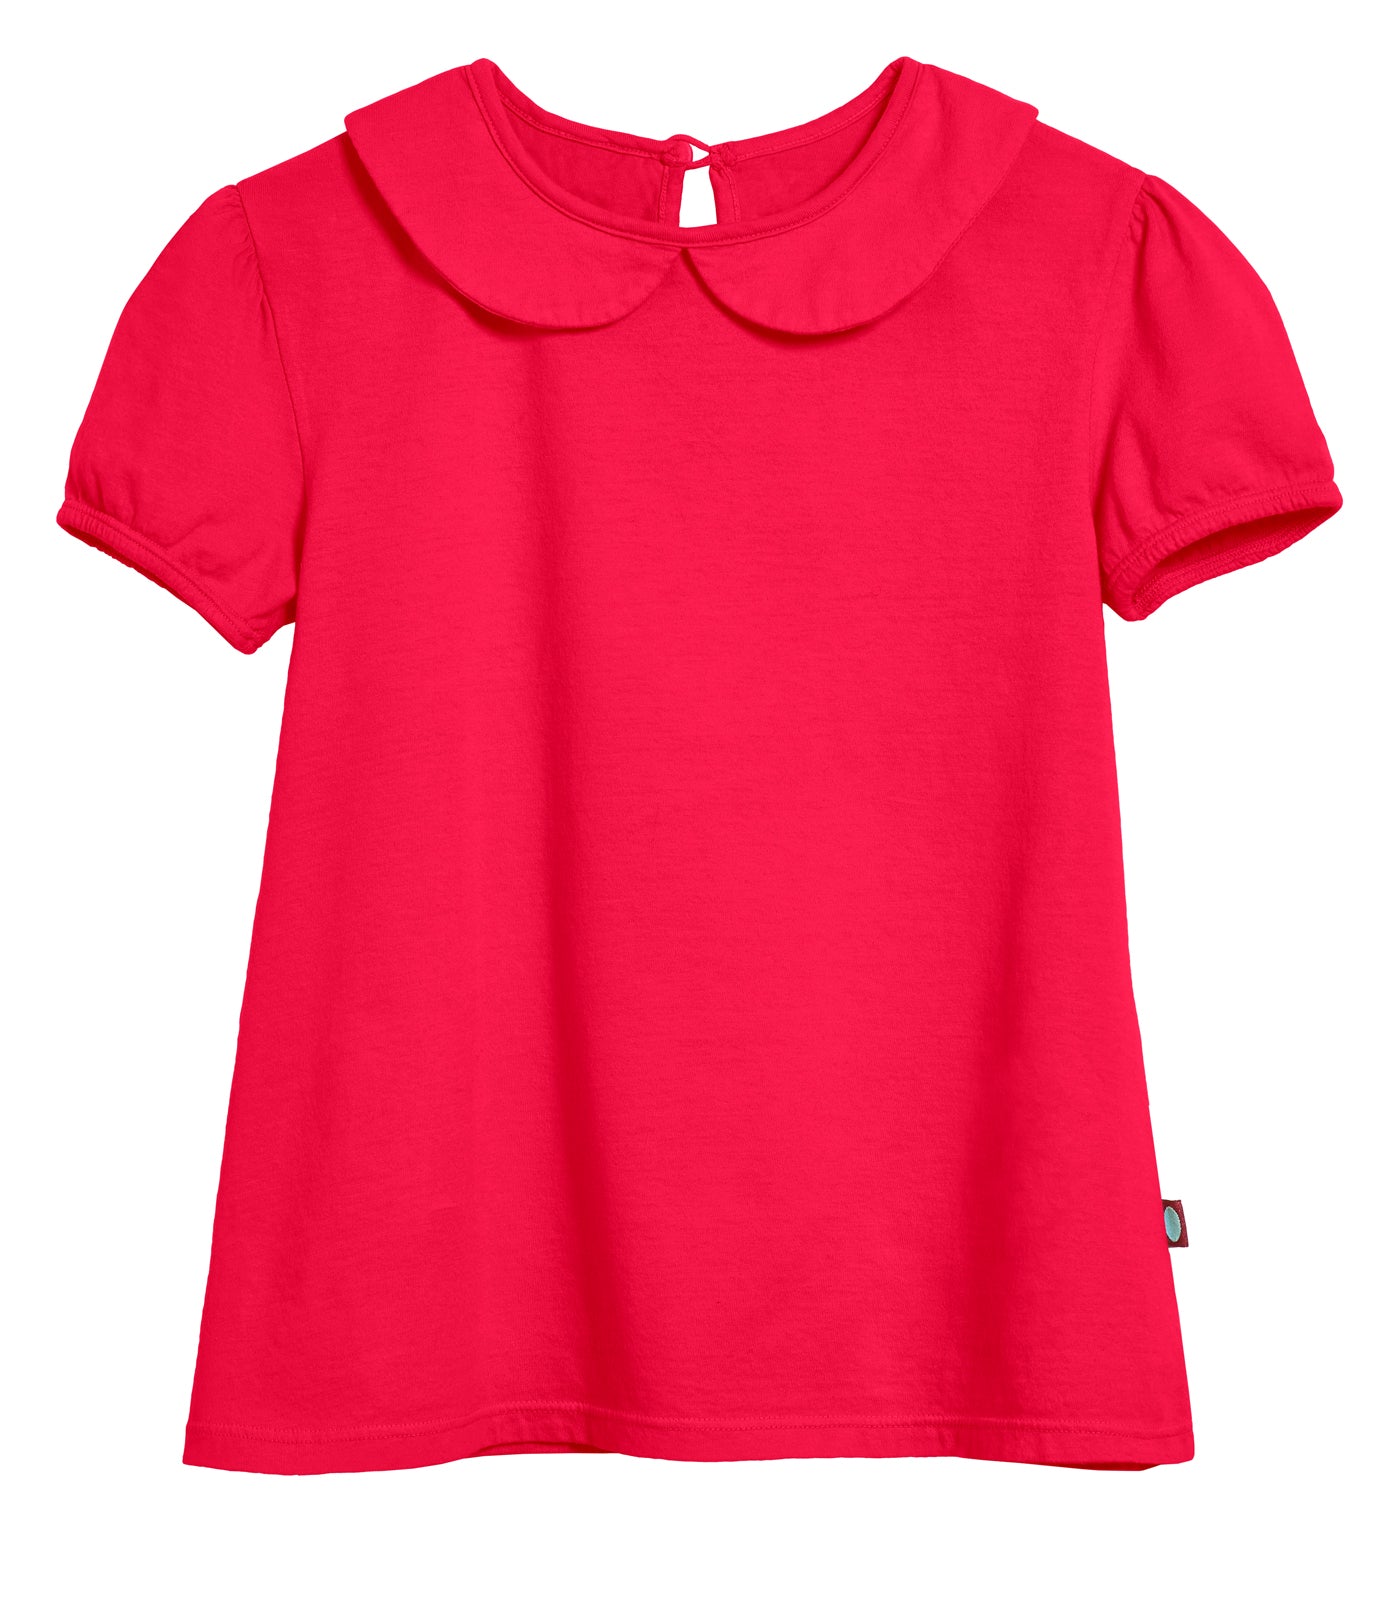 Girls Peter Pan Collar Puff Sleeve Tee | Candy Apple / 4Y - Super Comfy Kids T-Shirts, Softest 100% Cotton Tops, Sensory Friendly, USA Made, City